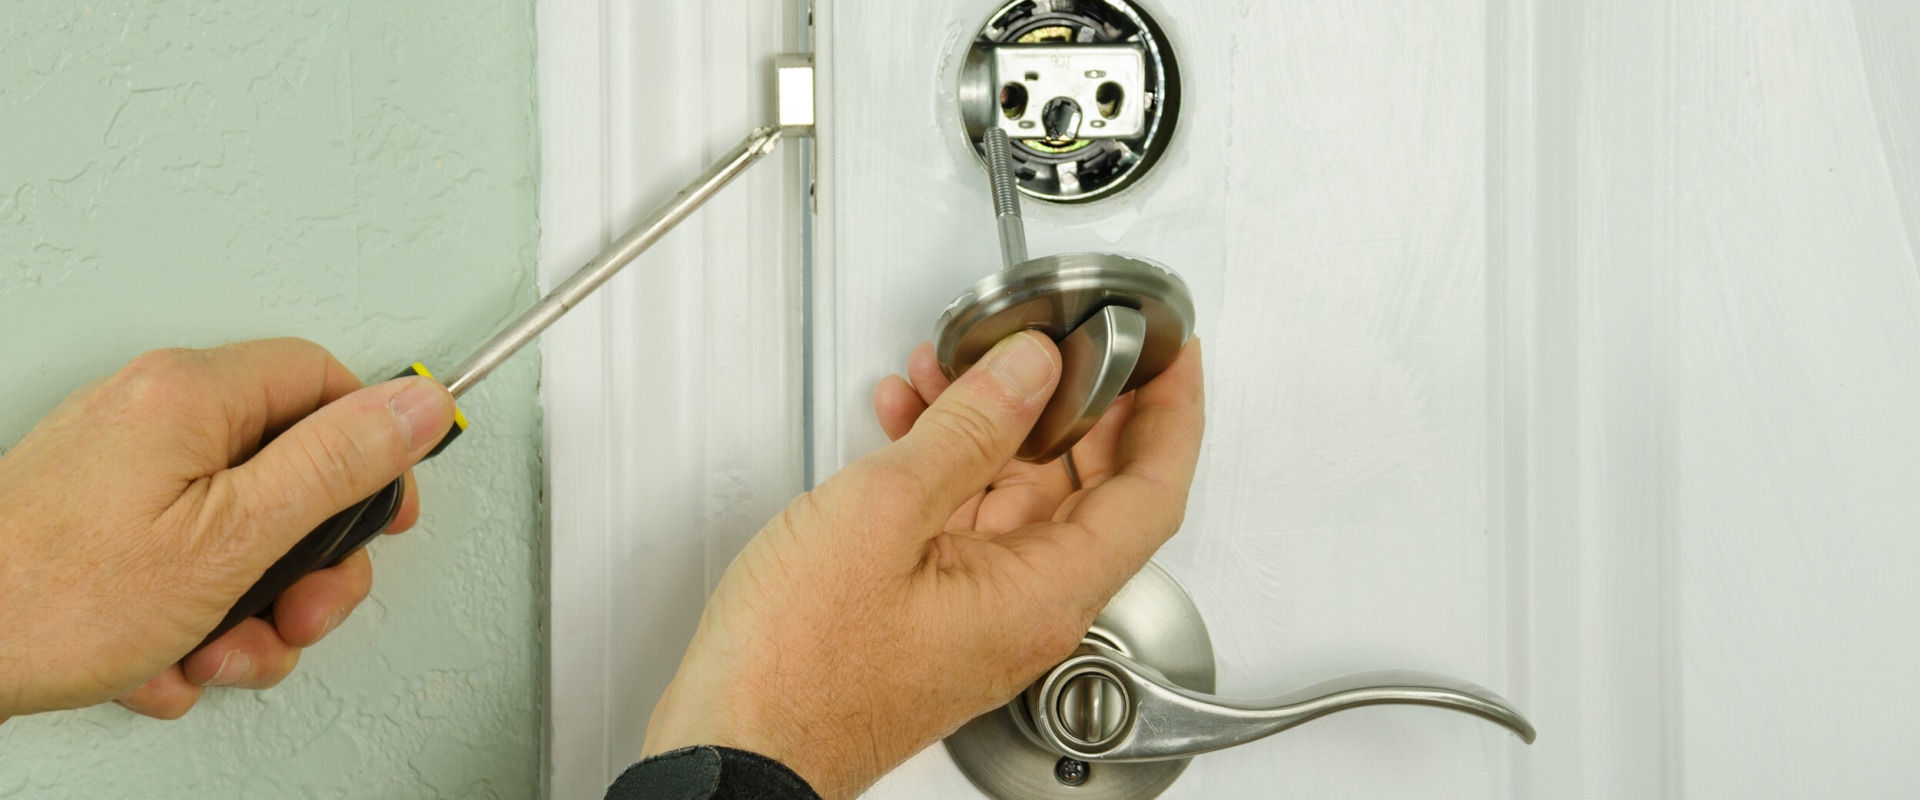 What Types of Locks Can a Residential Locksmith Install?